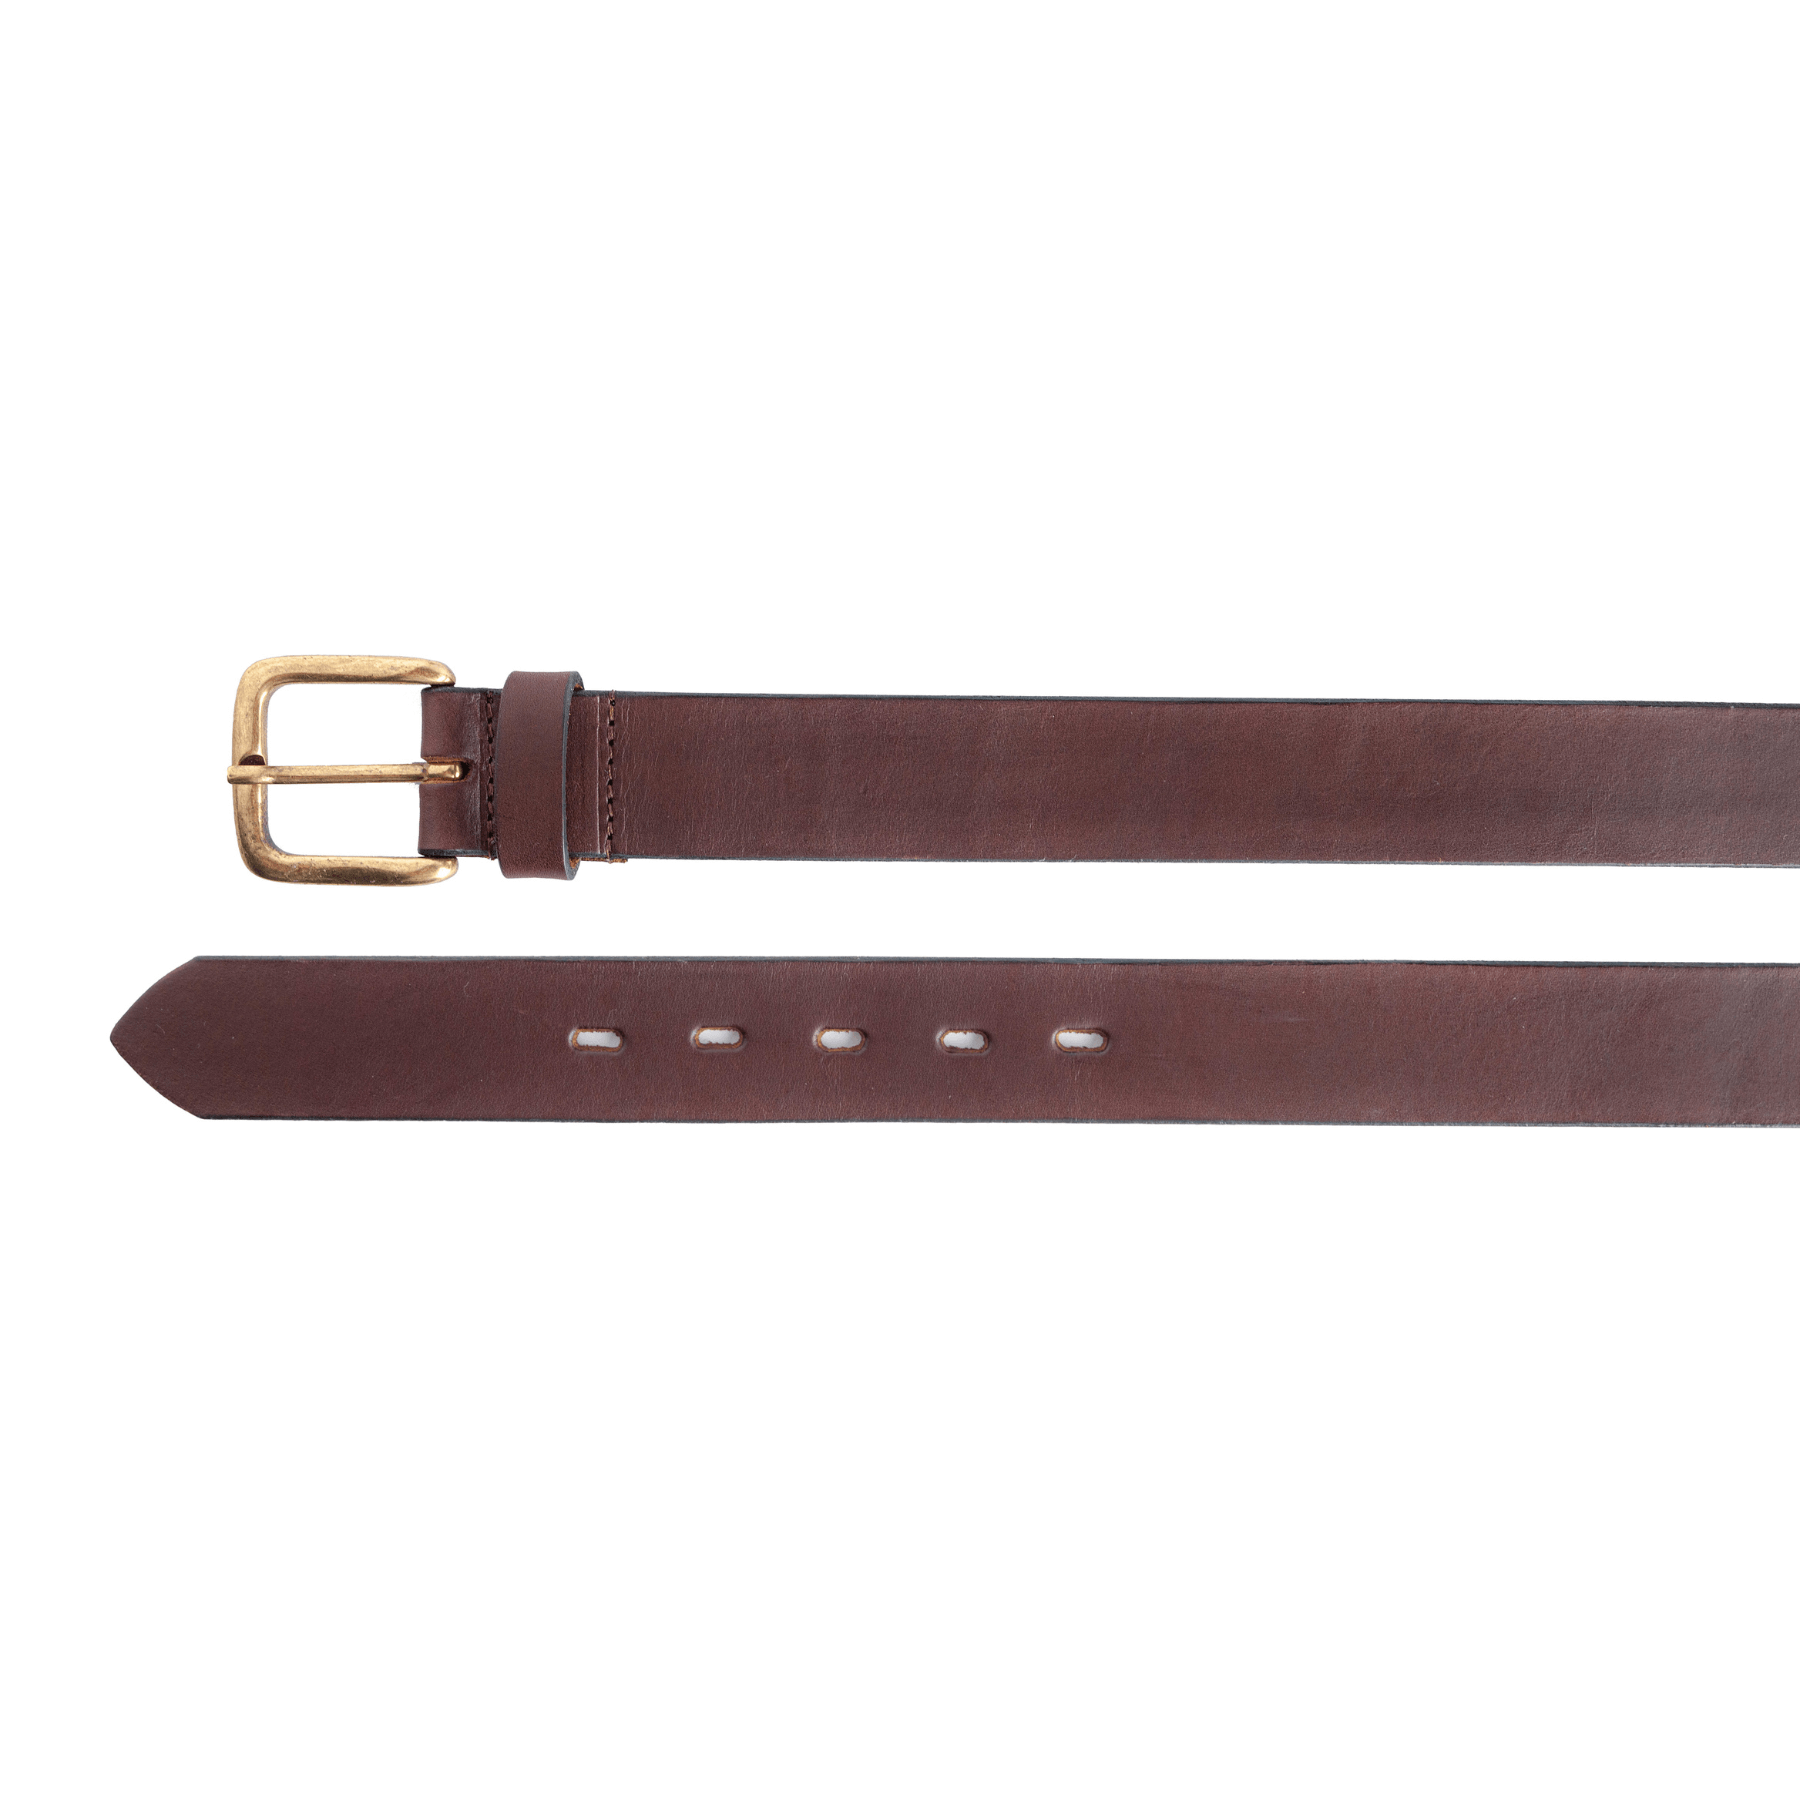 Gaucholife Belts Vegetable-Tanned Leather Polo Belt (Brown)